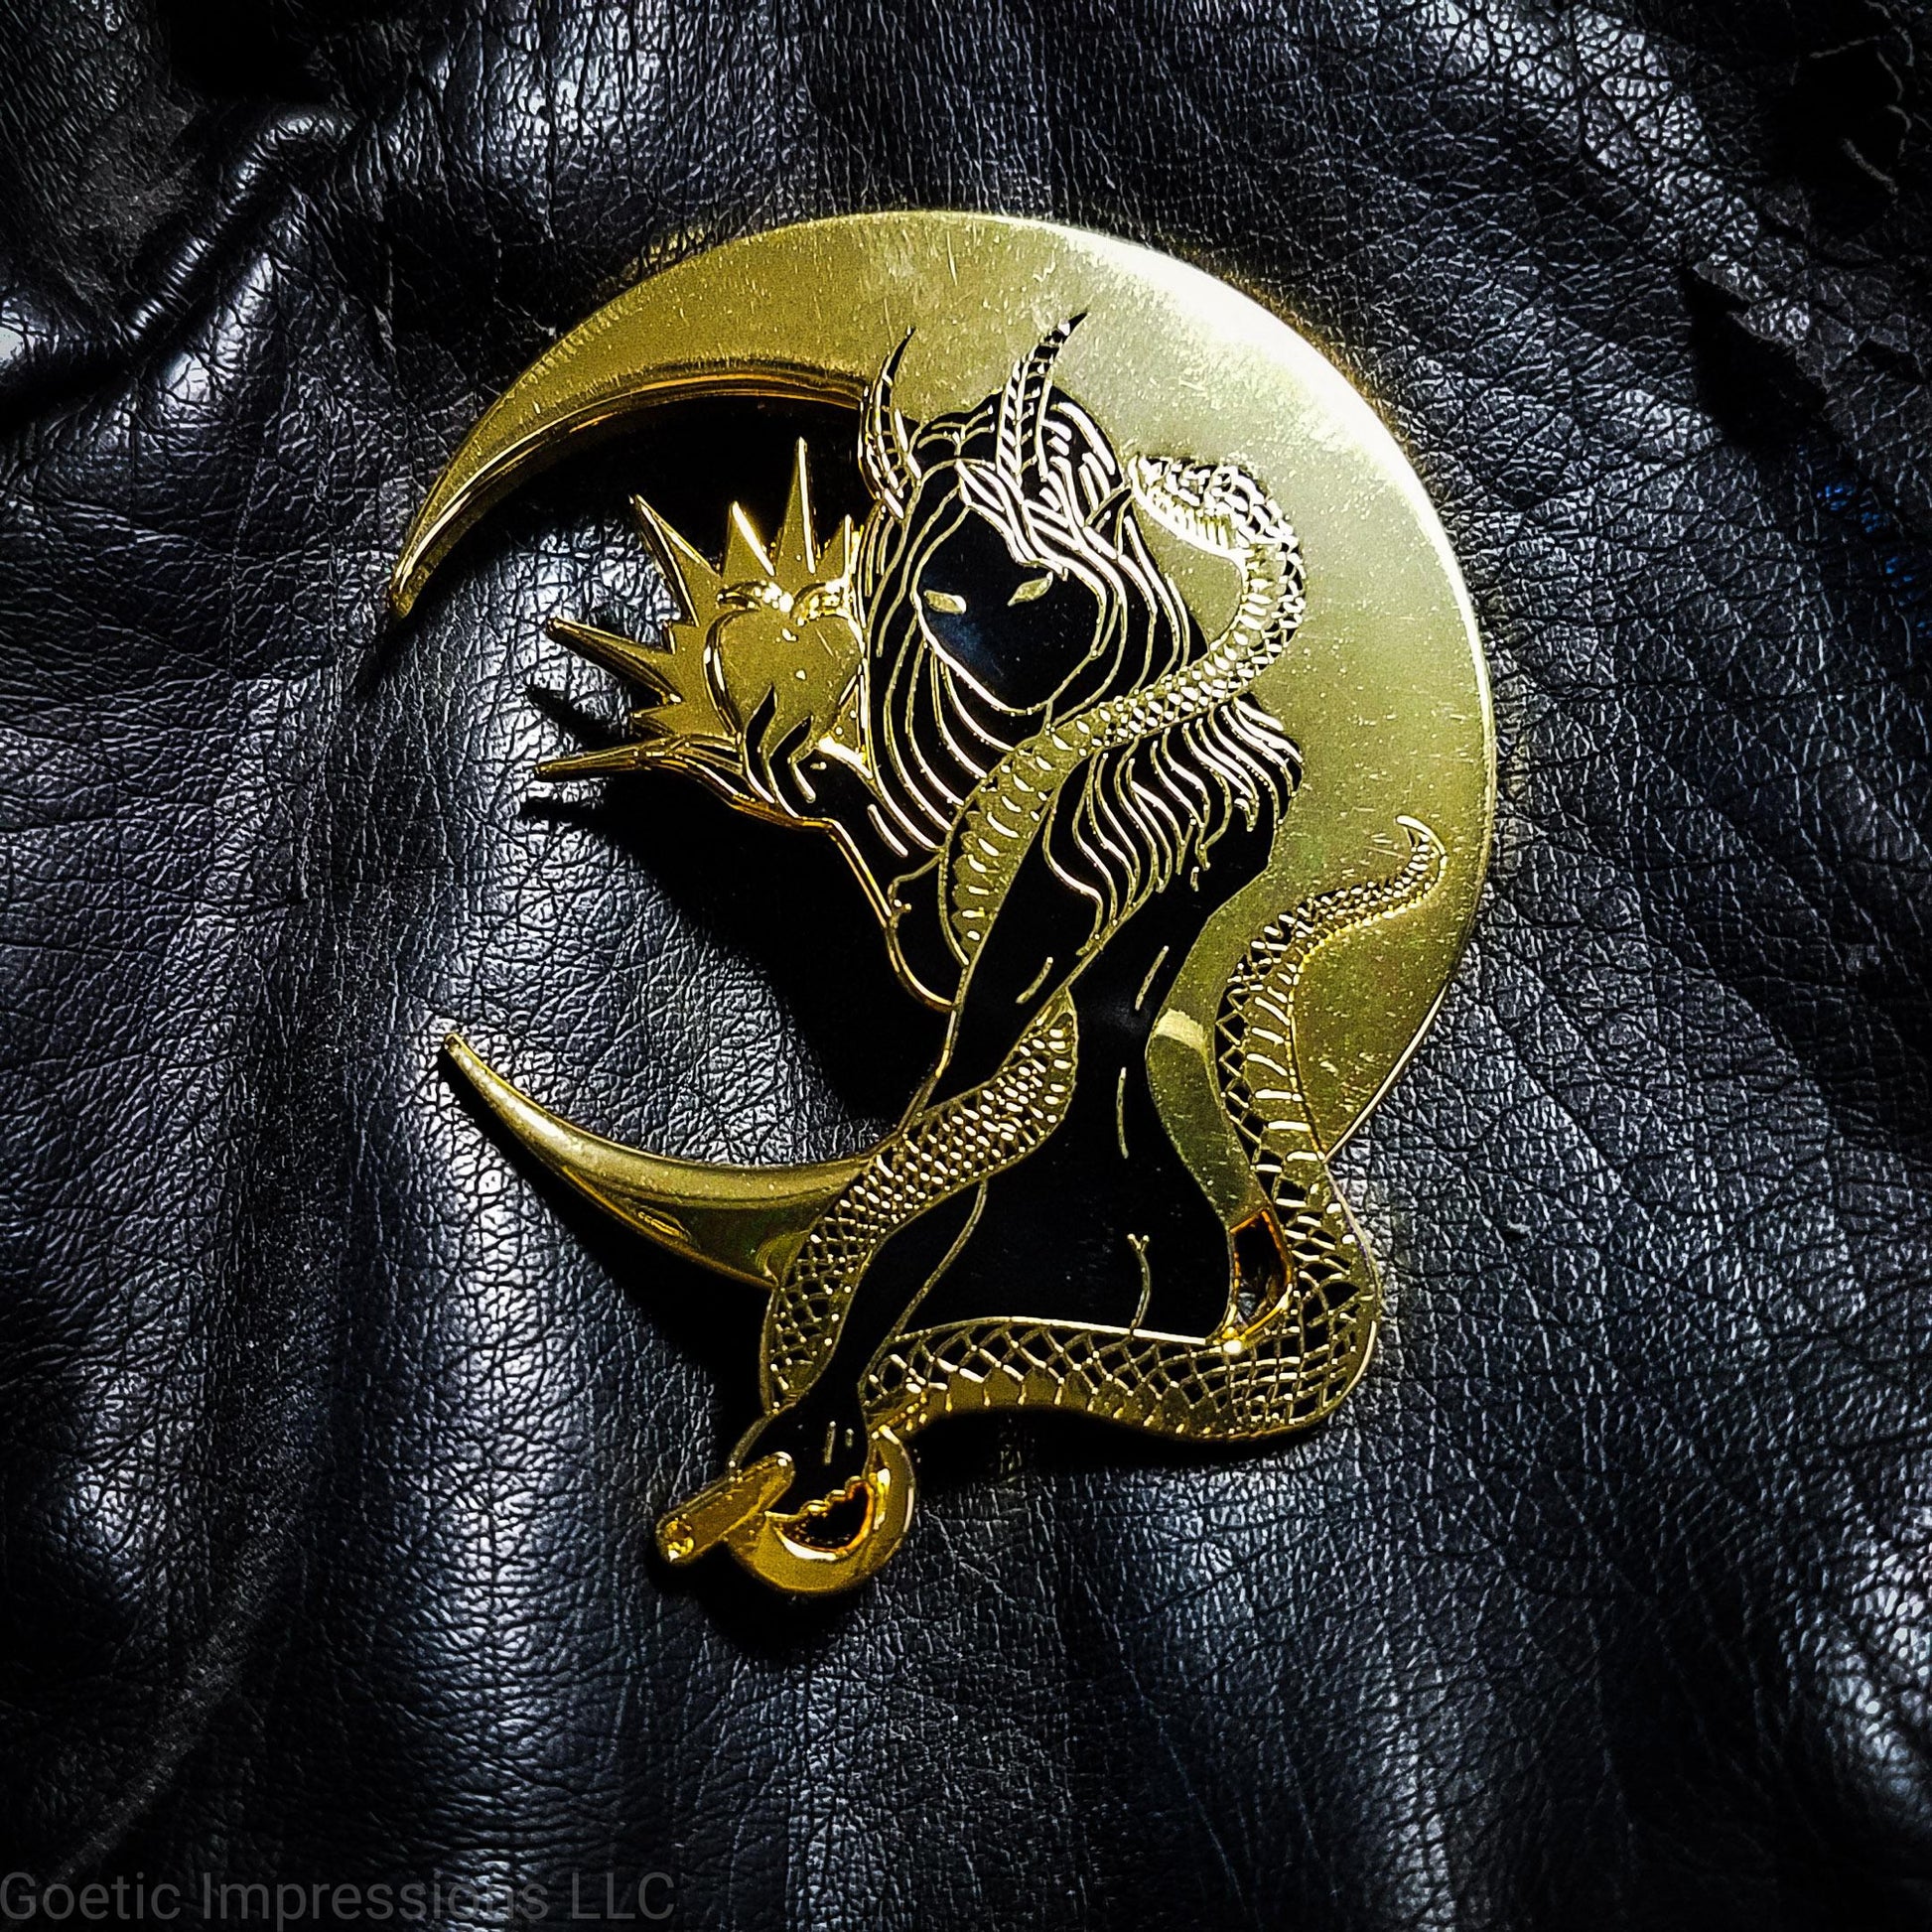 A black and gold hard enamel pin of Lilith. Lilith is holding a shining apple in one hand and a rod and circle in the other. Her one arm is coiled with a serpent. A cresent moon is behind her. The pin is on a black leather jacket